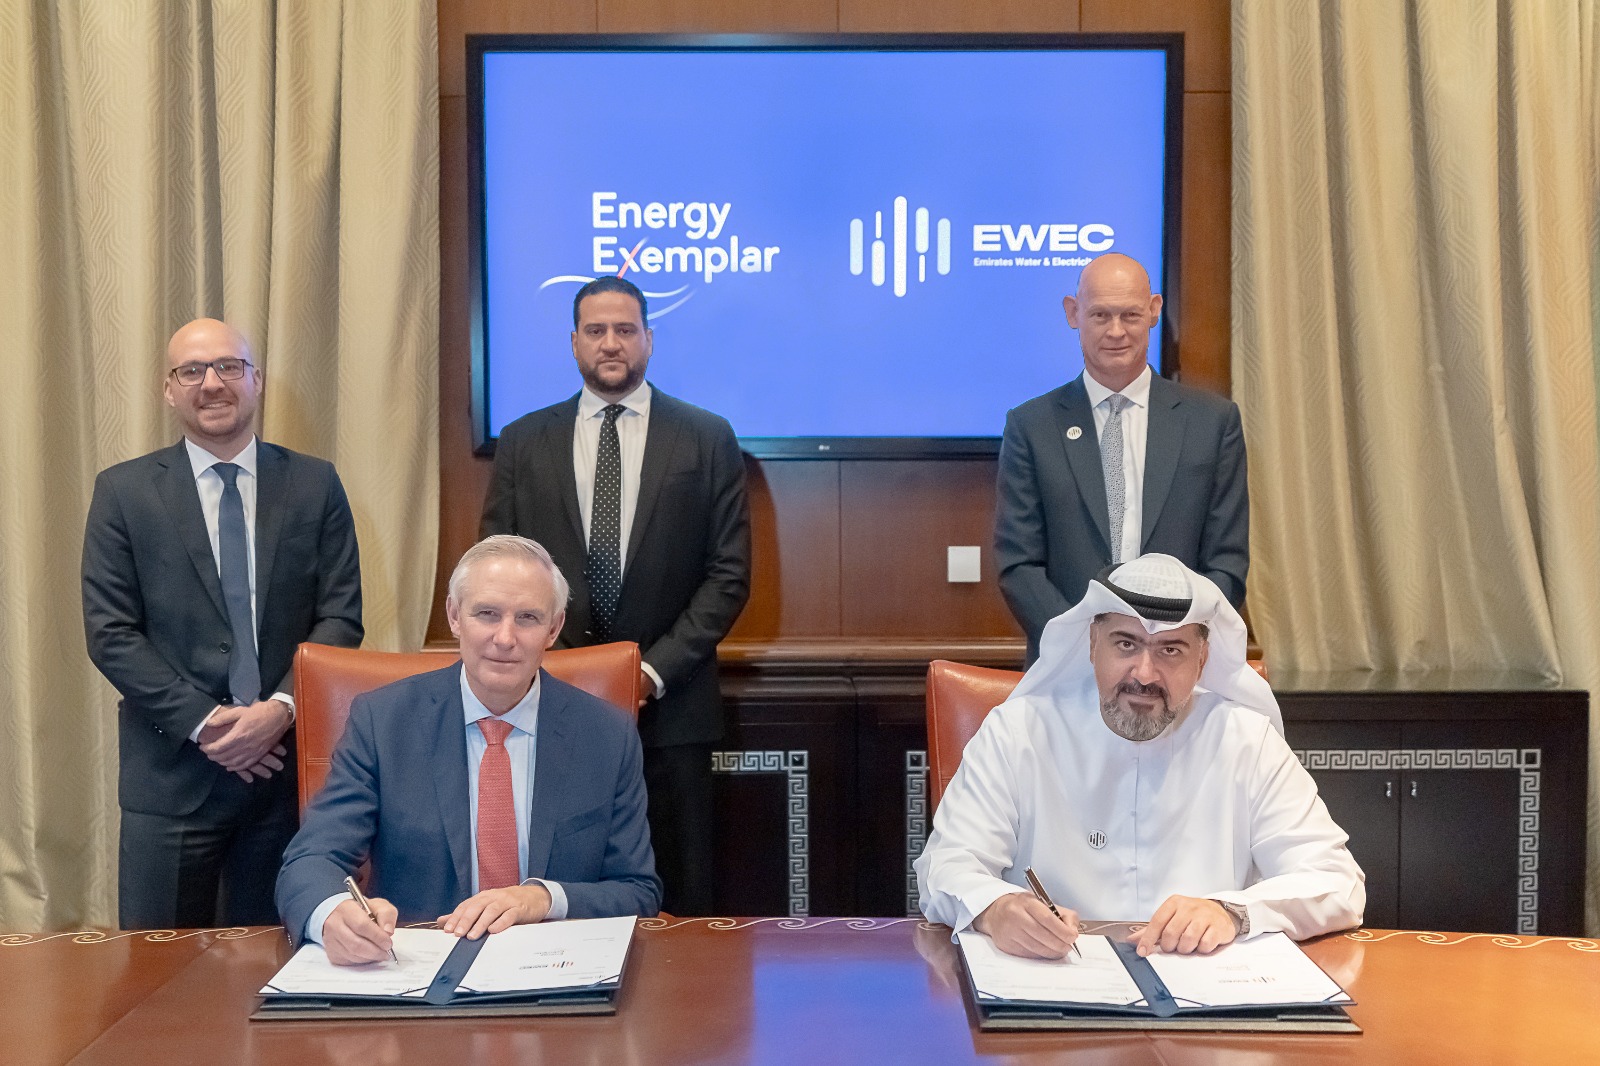 MoU Signing Ceremony between Energy Exemplar and EWEC